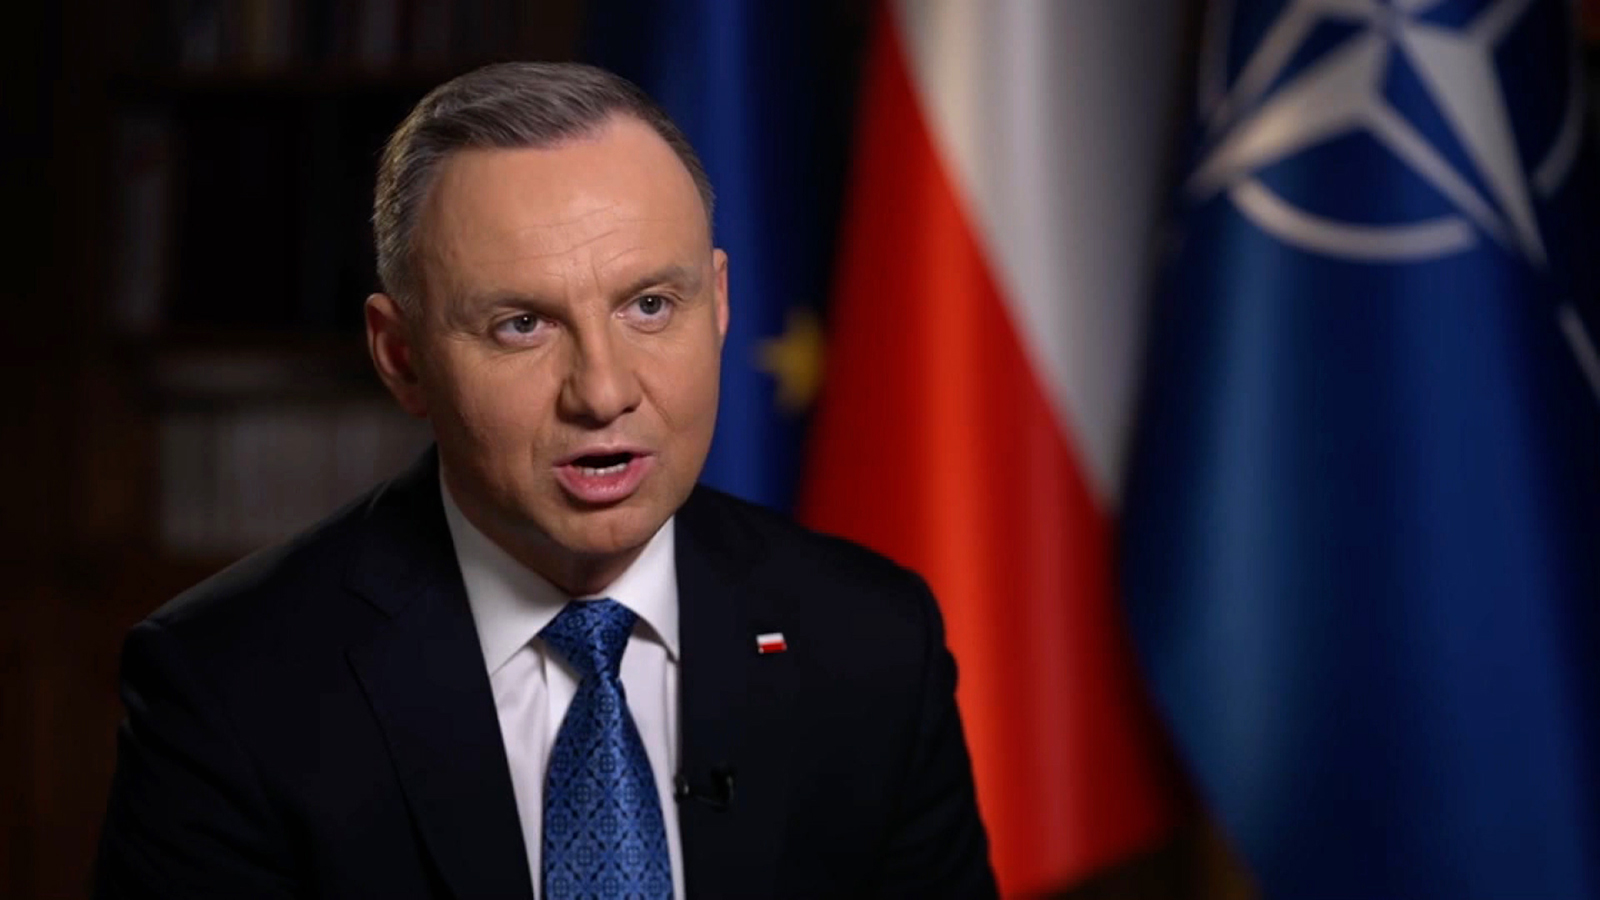 Poland's President Andrzej Duda speaks to CNN's Christiane Amanpour in an interview. 